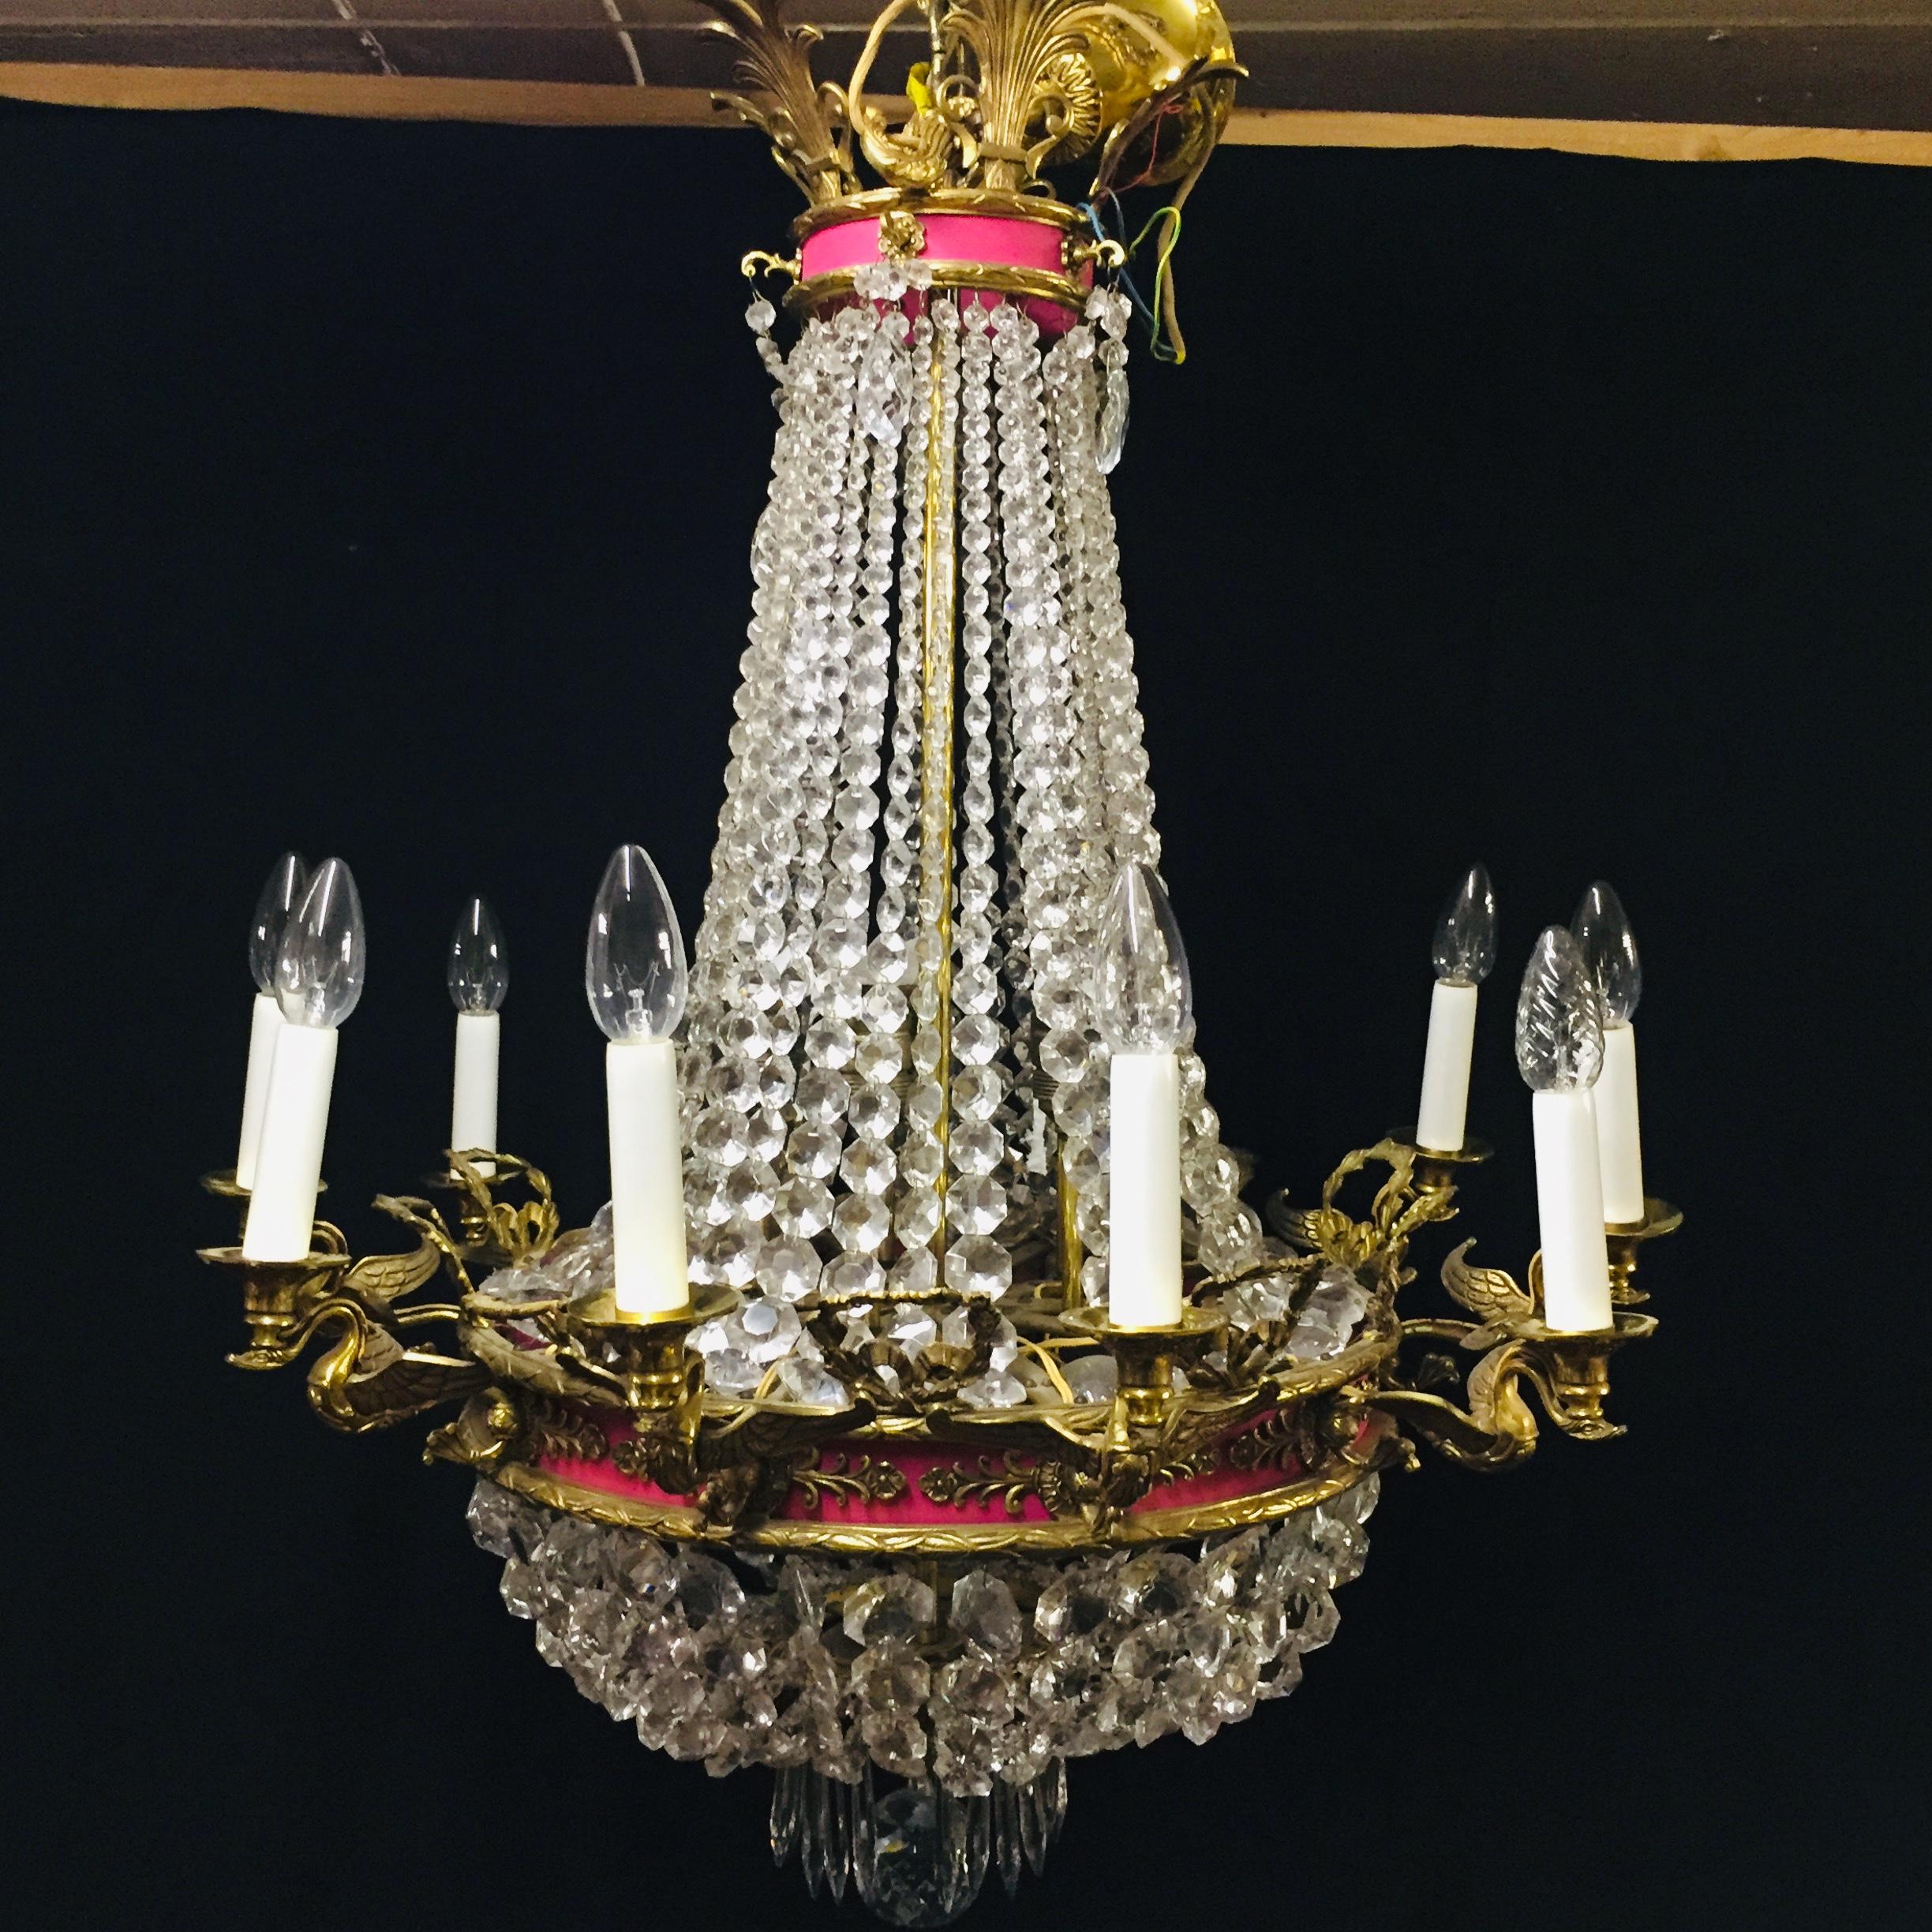 A fine French Empire swan chandelier featuring 10 branches of finely cast gilded brass shaped as swans
crystal and brass basket chandelier with 10 brass swan arms, 10 lamps inside.
The large and small ring is decorated with fittings, the bottom